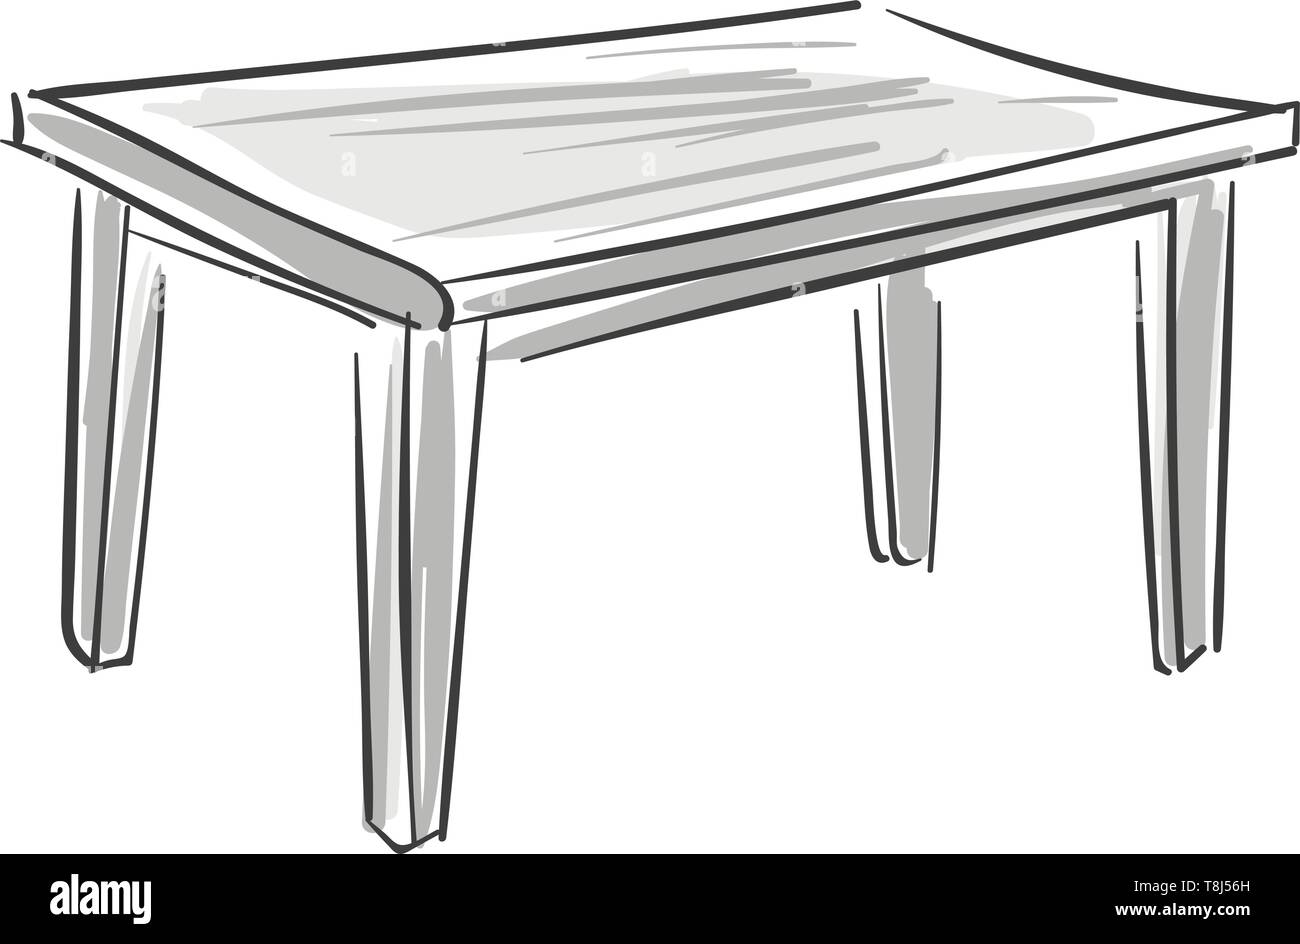 Sketched table table sketch illustration Sketched table isolated on white  background table sketch vector illustration  CanStock